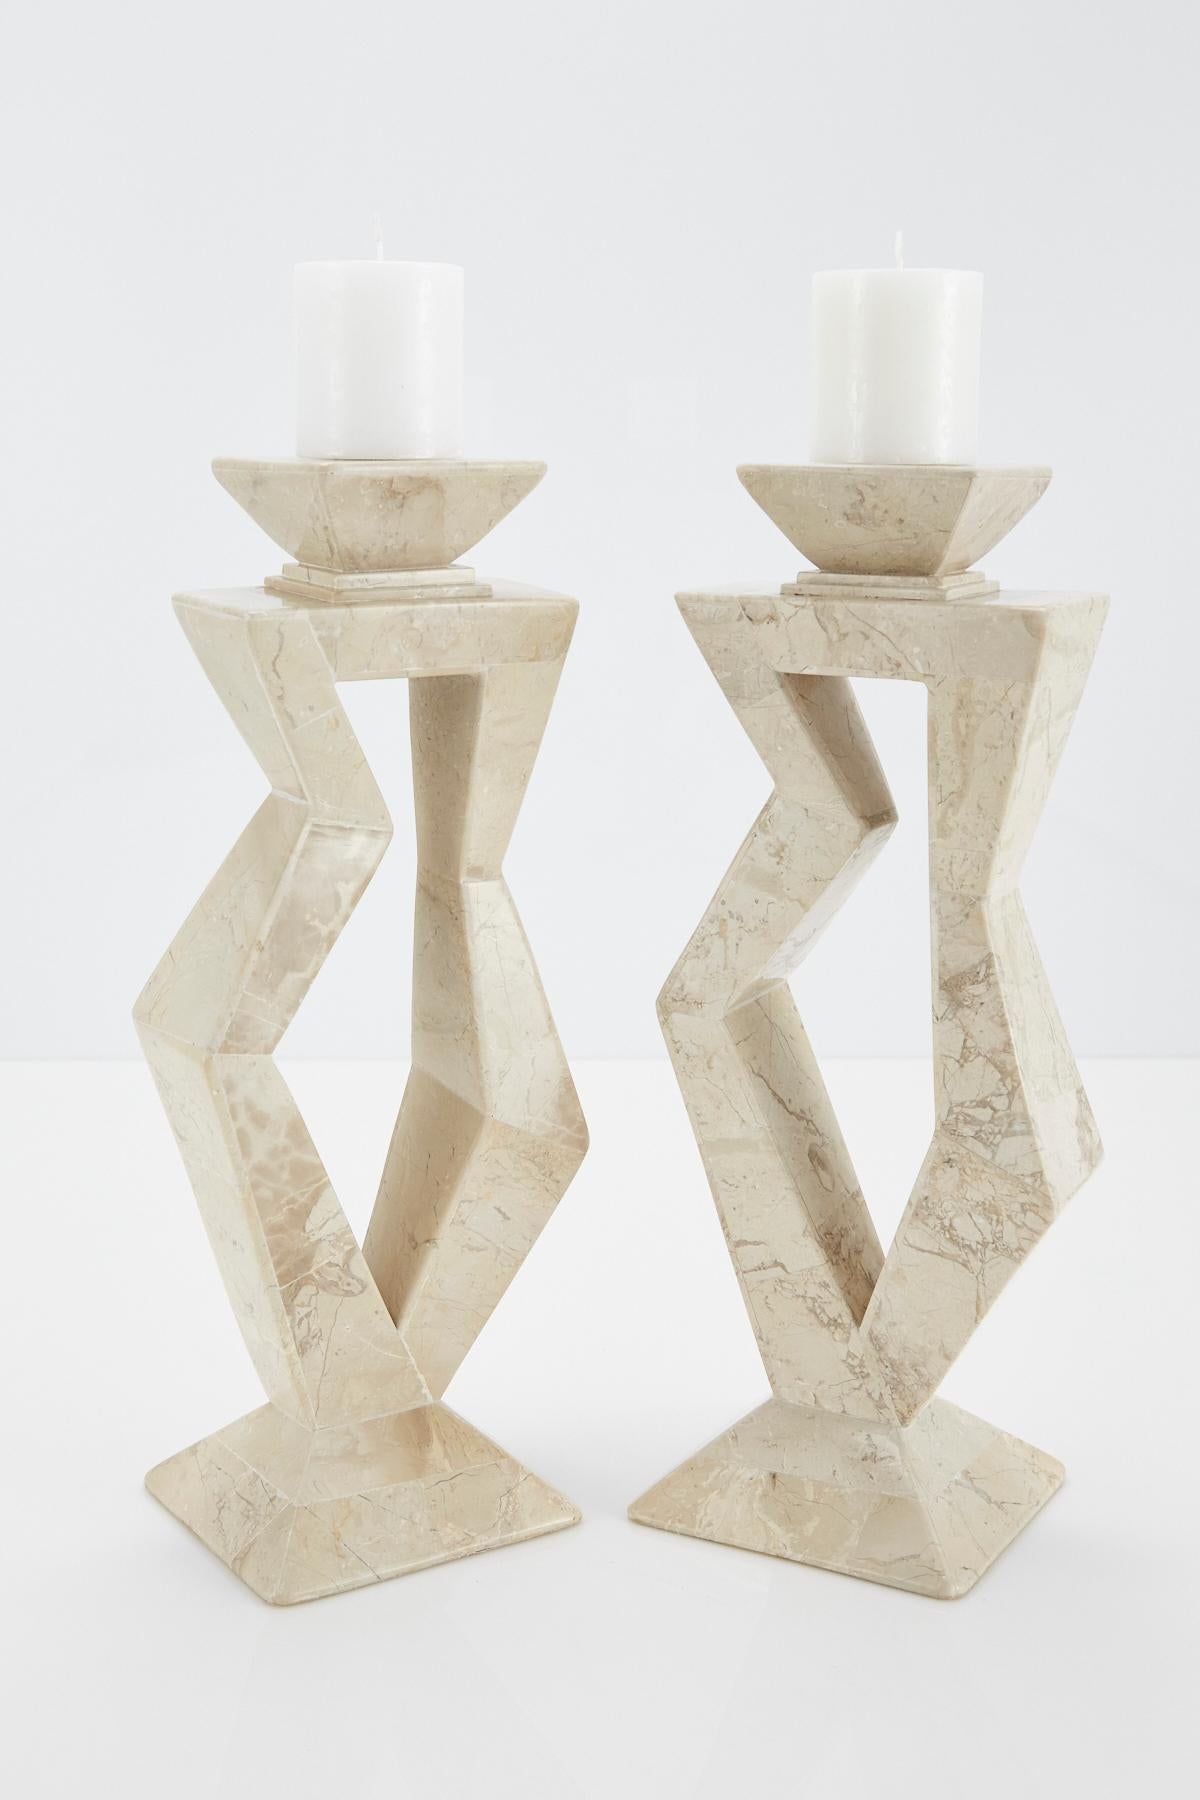 Pair of large candlesticks with jaunty abstract shape, executed in tessellated cantor stone over wood. Postmodern styling.